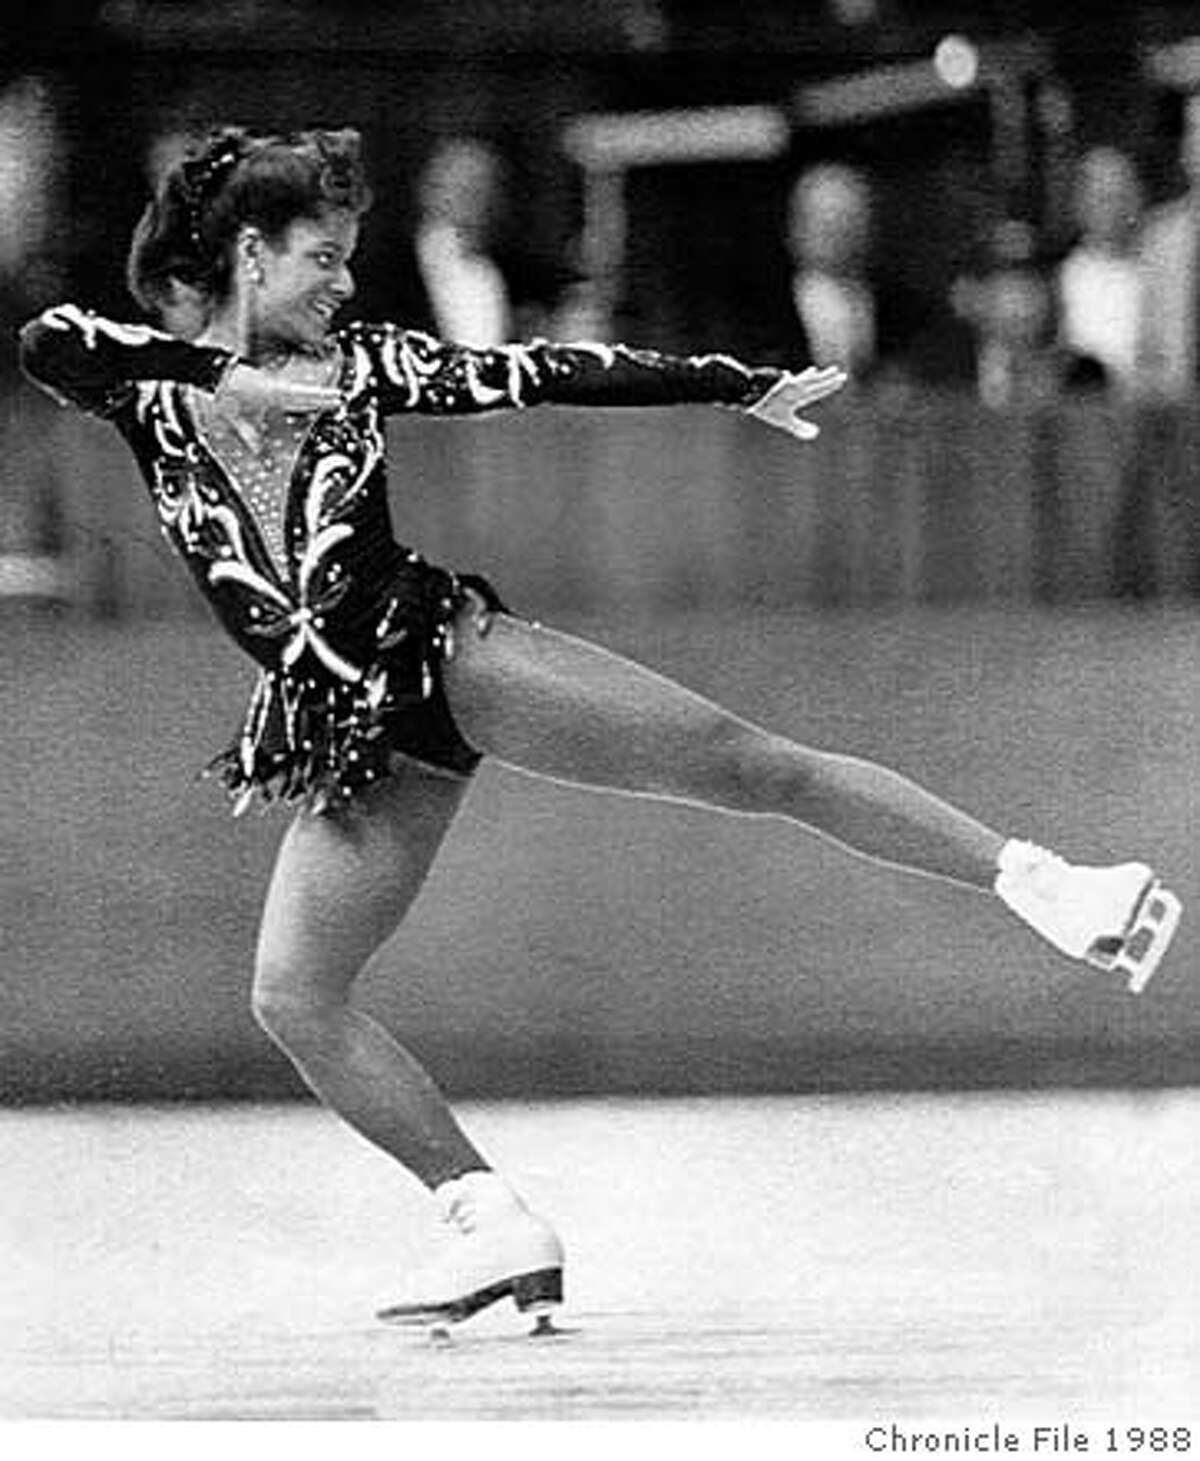 THOMAS-B-02NOV01-SP-HO Debi Thomas skates to victory and a gold medal at the U.S. Figure Skating Championships Saturday night in Denver. Thomas, from San Jose, California is the former U.S. and world champ. She defeated current U.S. champ Jill Trenary for the title. CAT